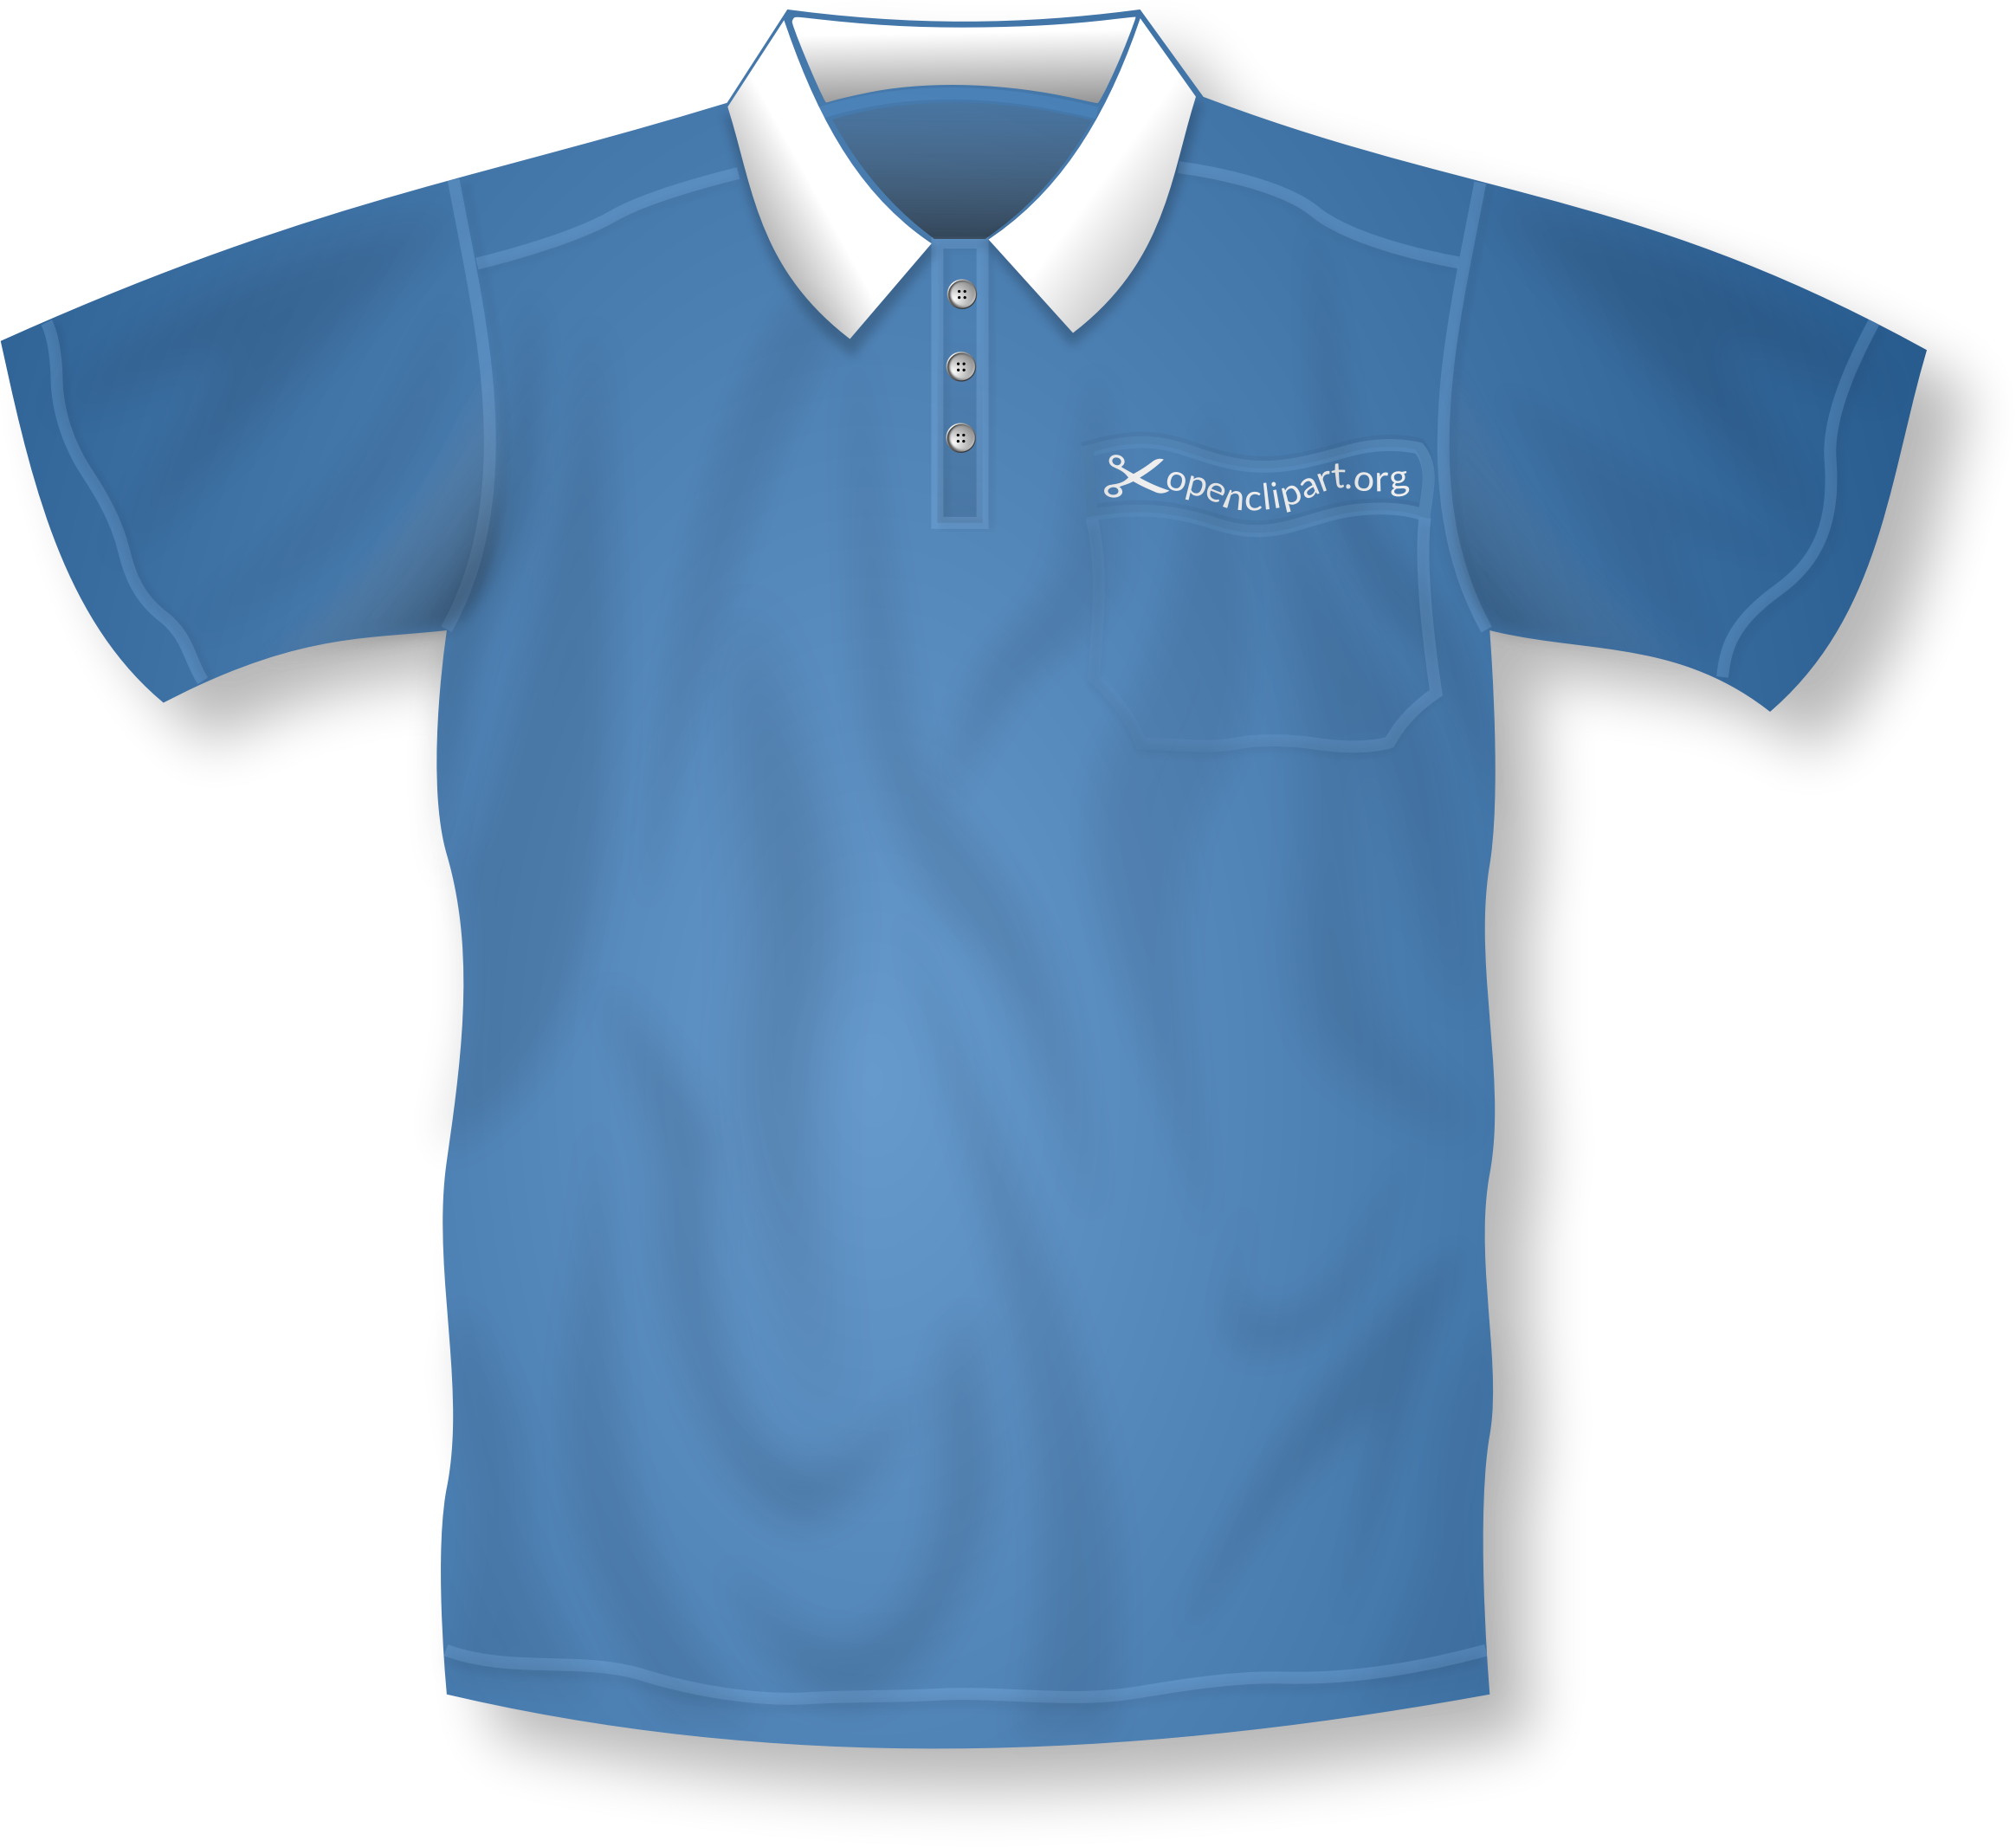  collection of polo. Shirts clipart cartoon